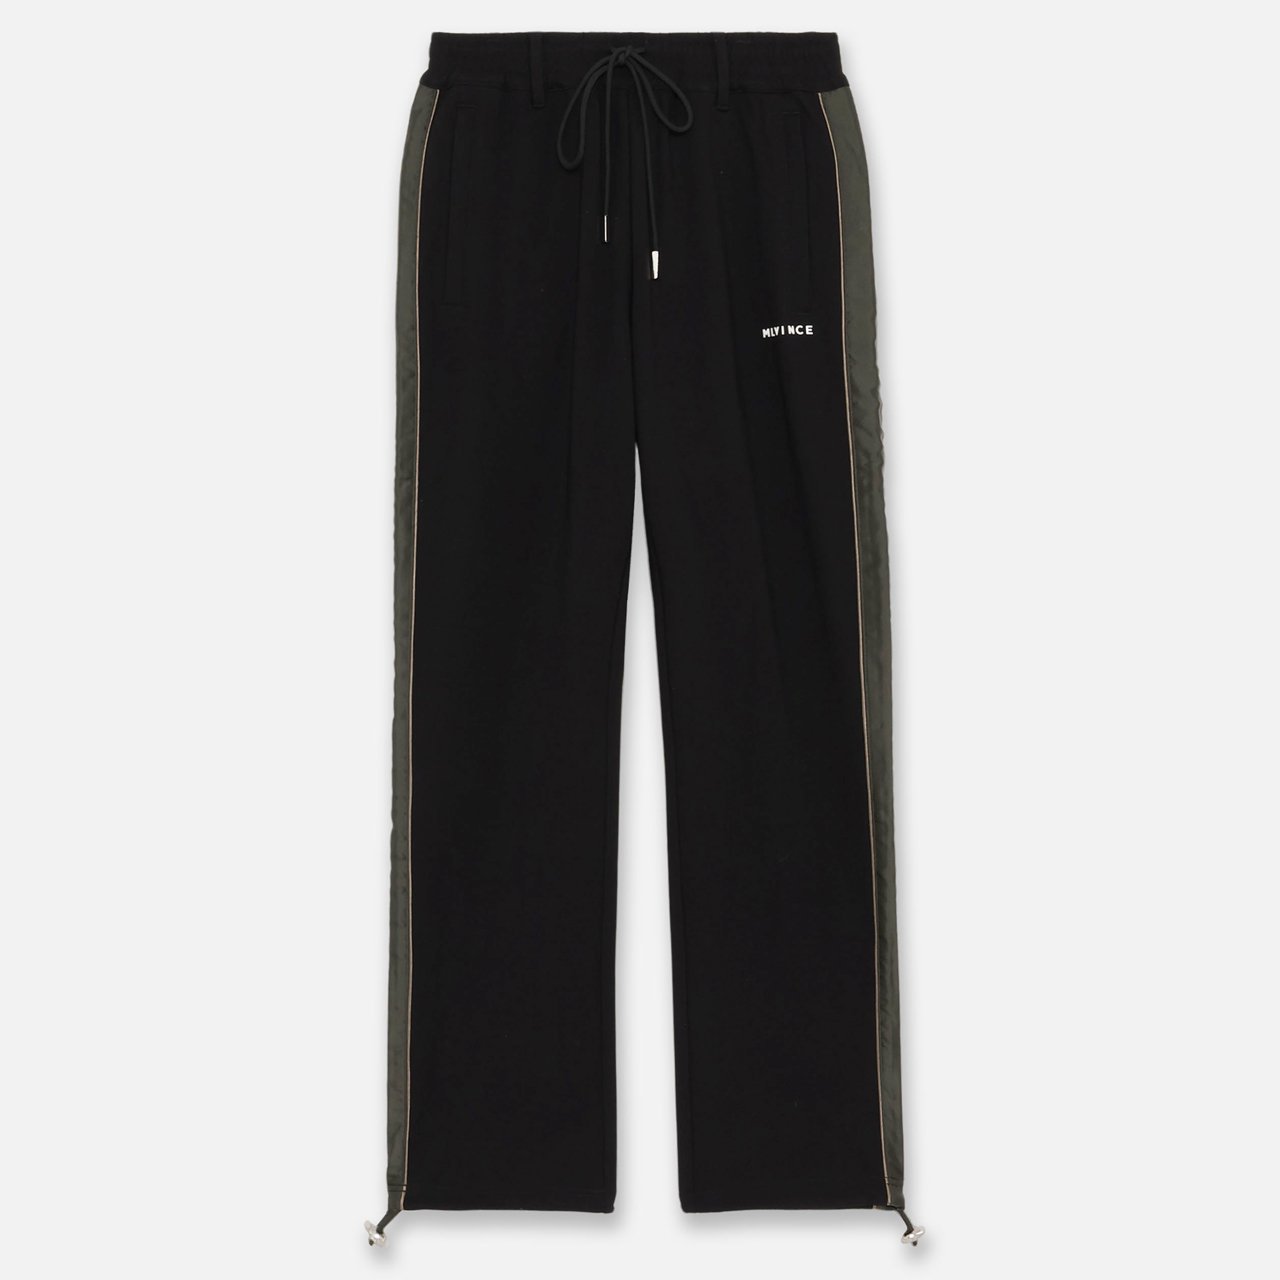 <img class='new_mark_img1' src='https://img.shop-pro.jp/img/new/icons5.gif' style='border:none;display:inline;margin:0px;padding:0px;width:auto;' />MLVINCE () | LUX TRACK PANTS BLACK